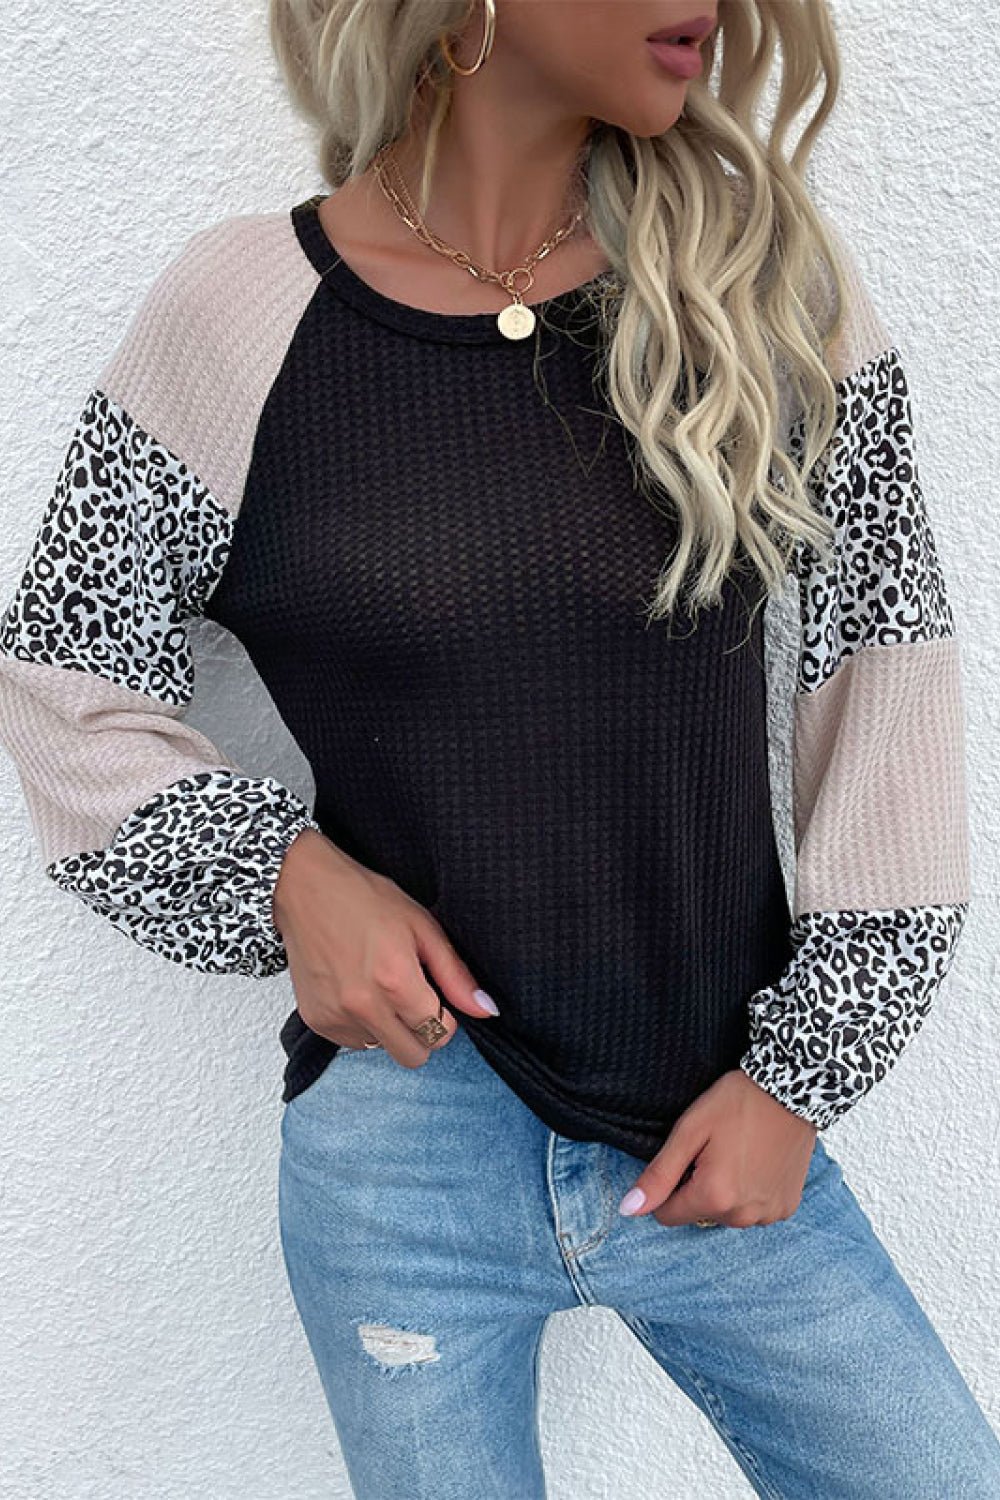 Contrast Leopard Print Waffle Knit Tee  | KIKI COUTURE-Women's Clothing, Designer Fashions, Shoes, Bags